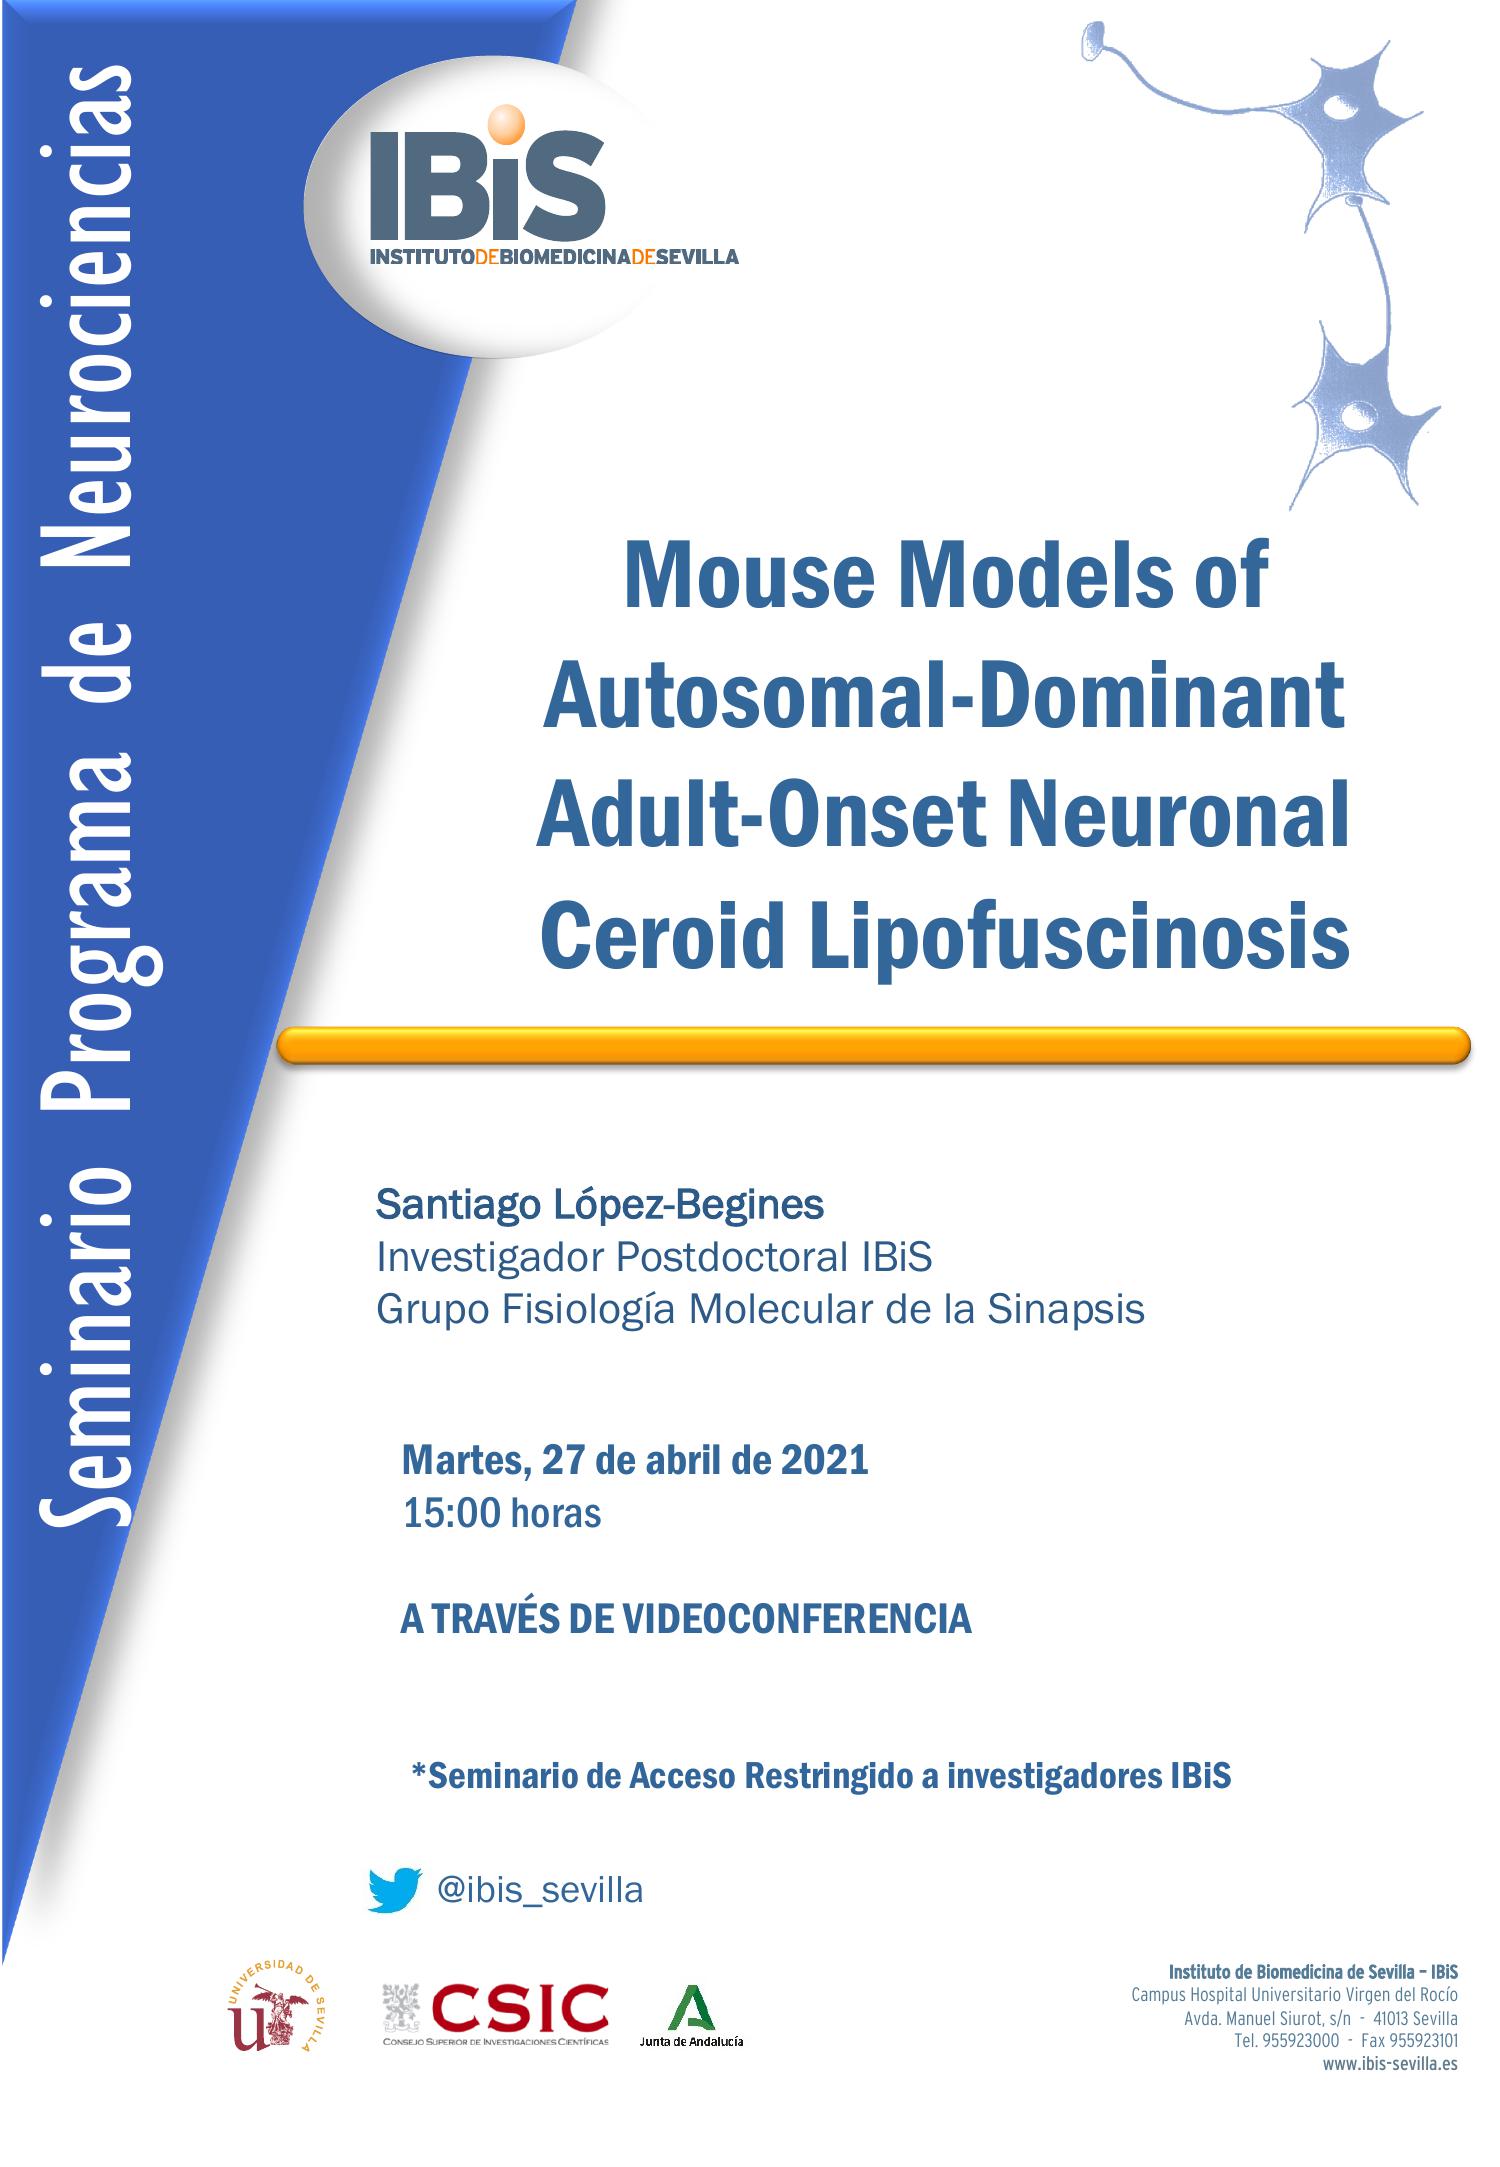 Poster: Mouse Models of Autosomal-Dominant Adult-Onset Neuronal Ceroid Lipofuscinosis